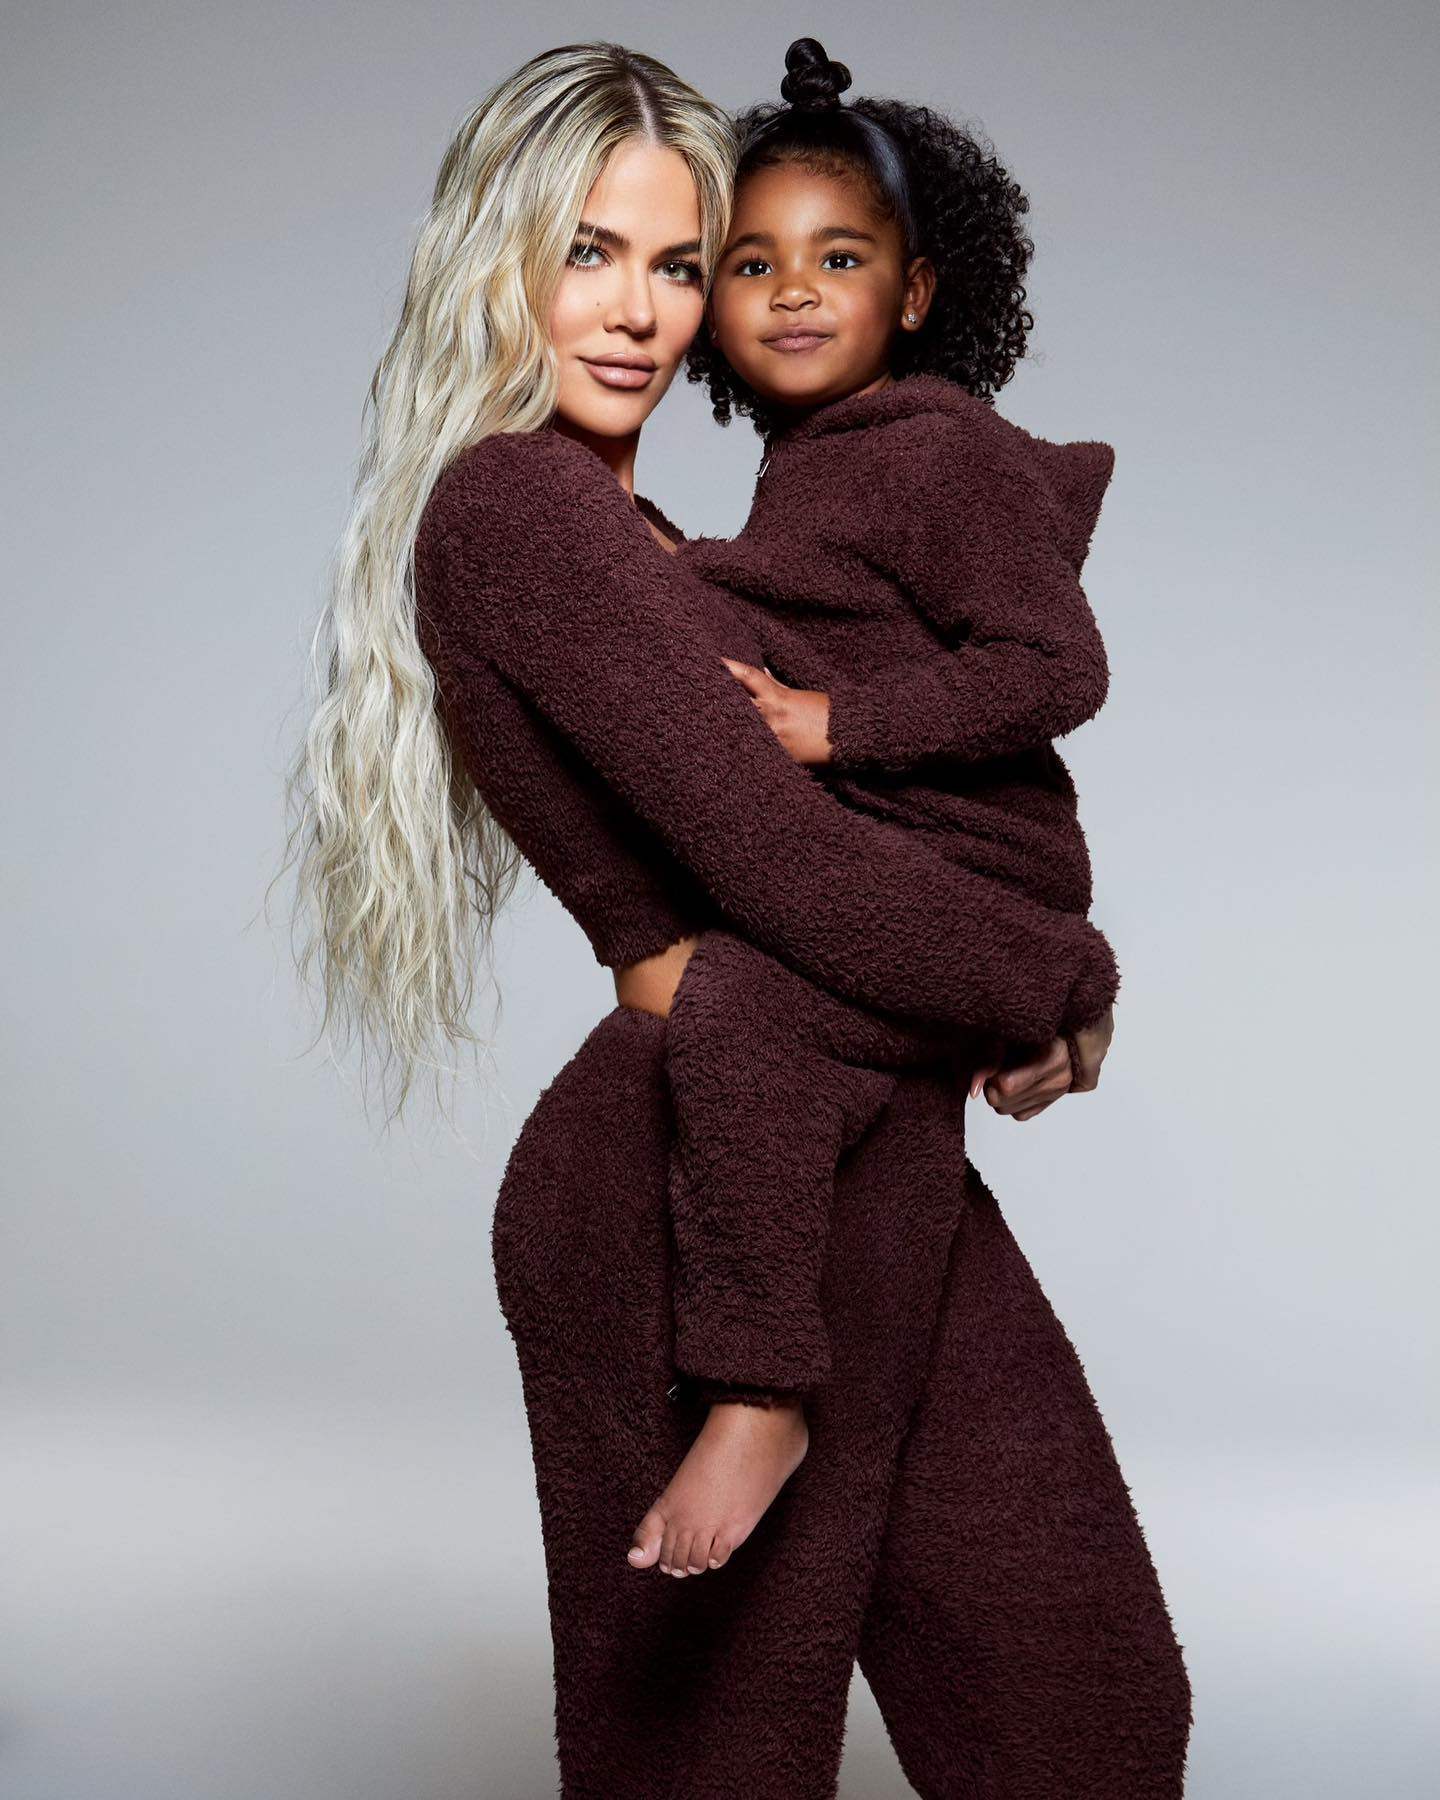 Inside the luxury life of Khloe Kardashian's daughter True: from